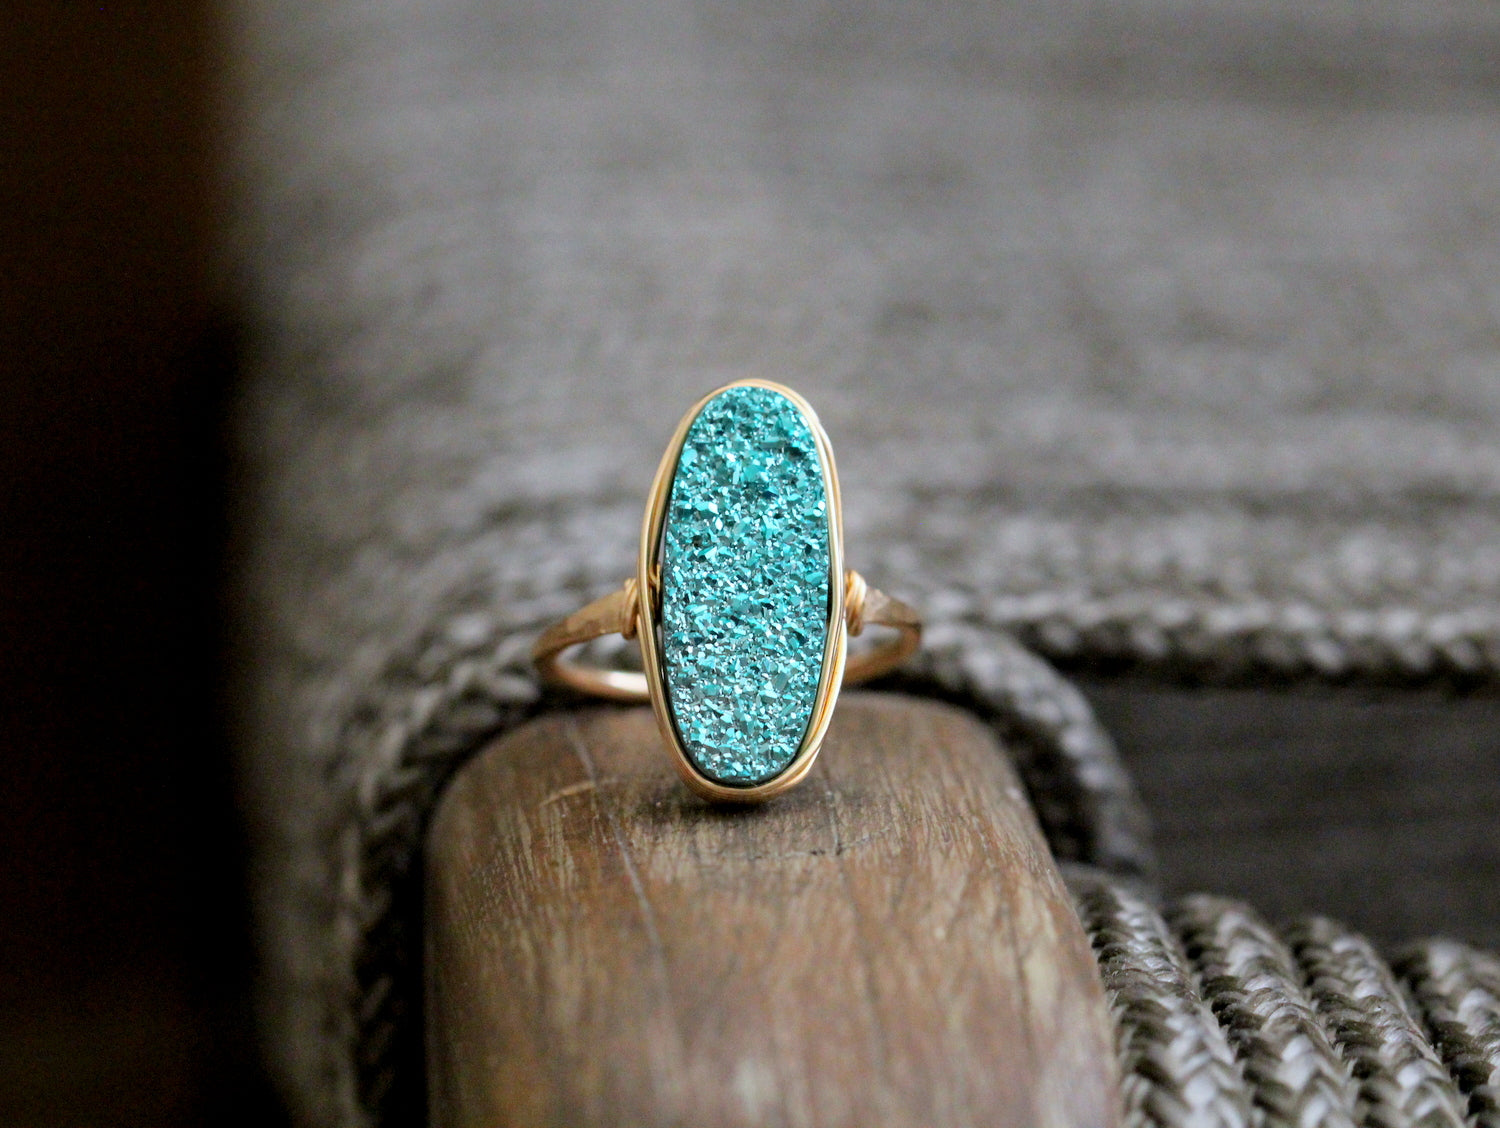 Long Oval Druzy Ring - Teal